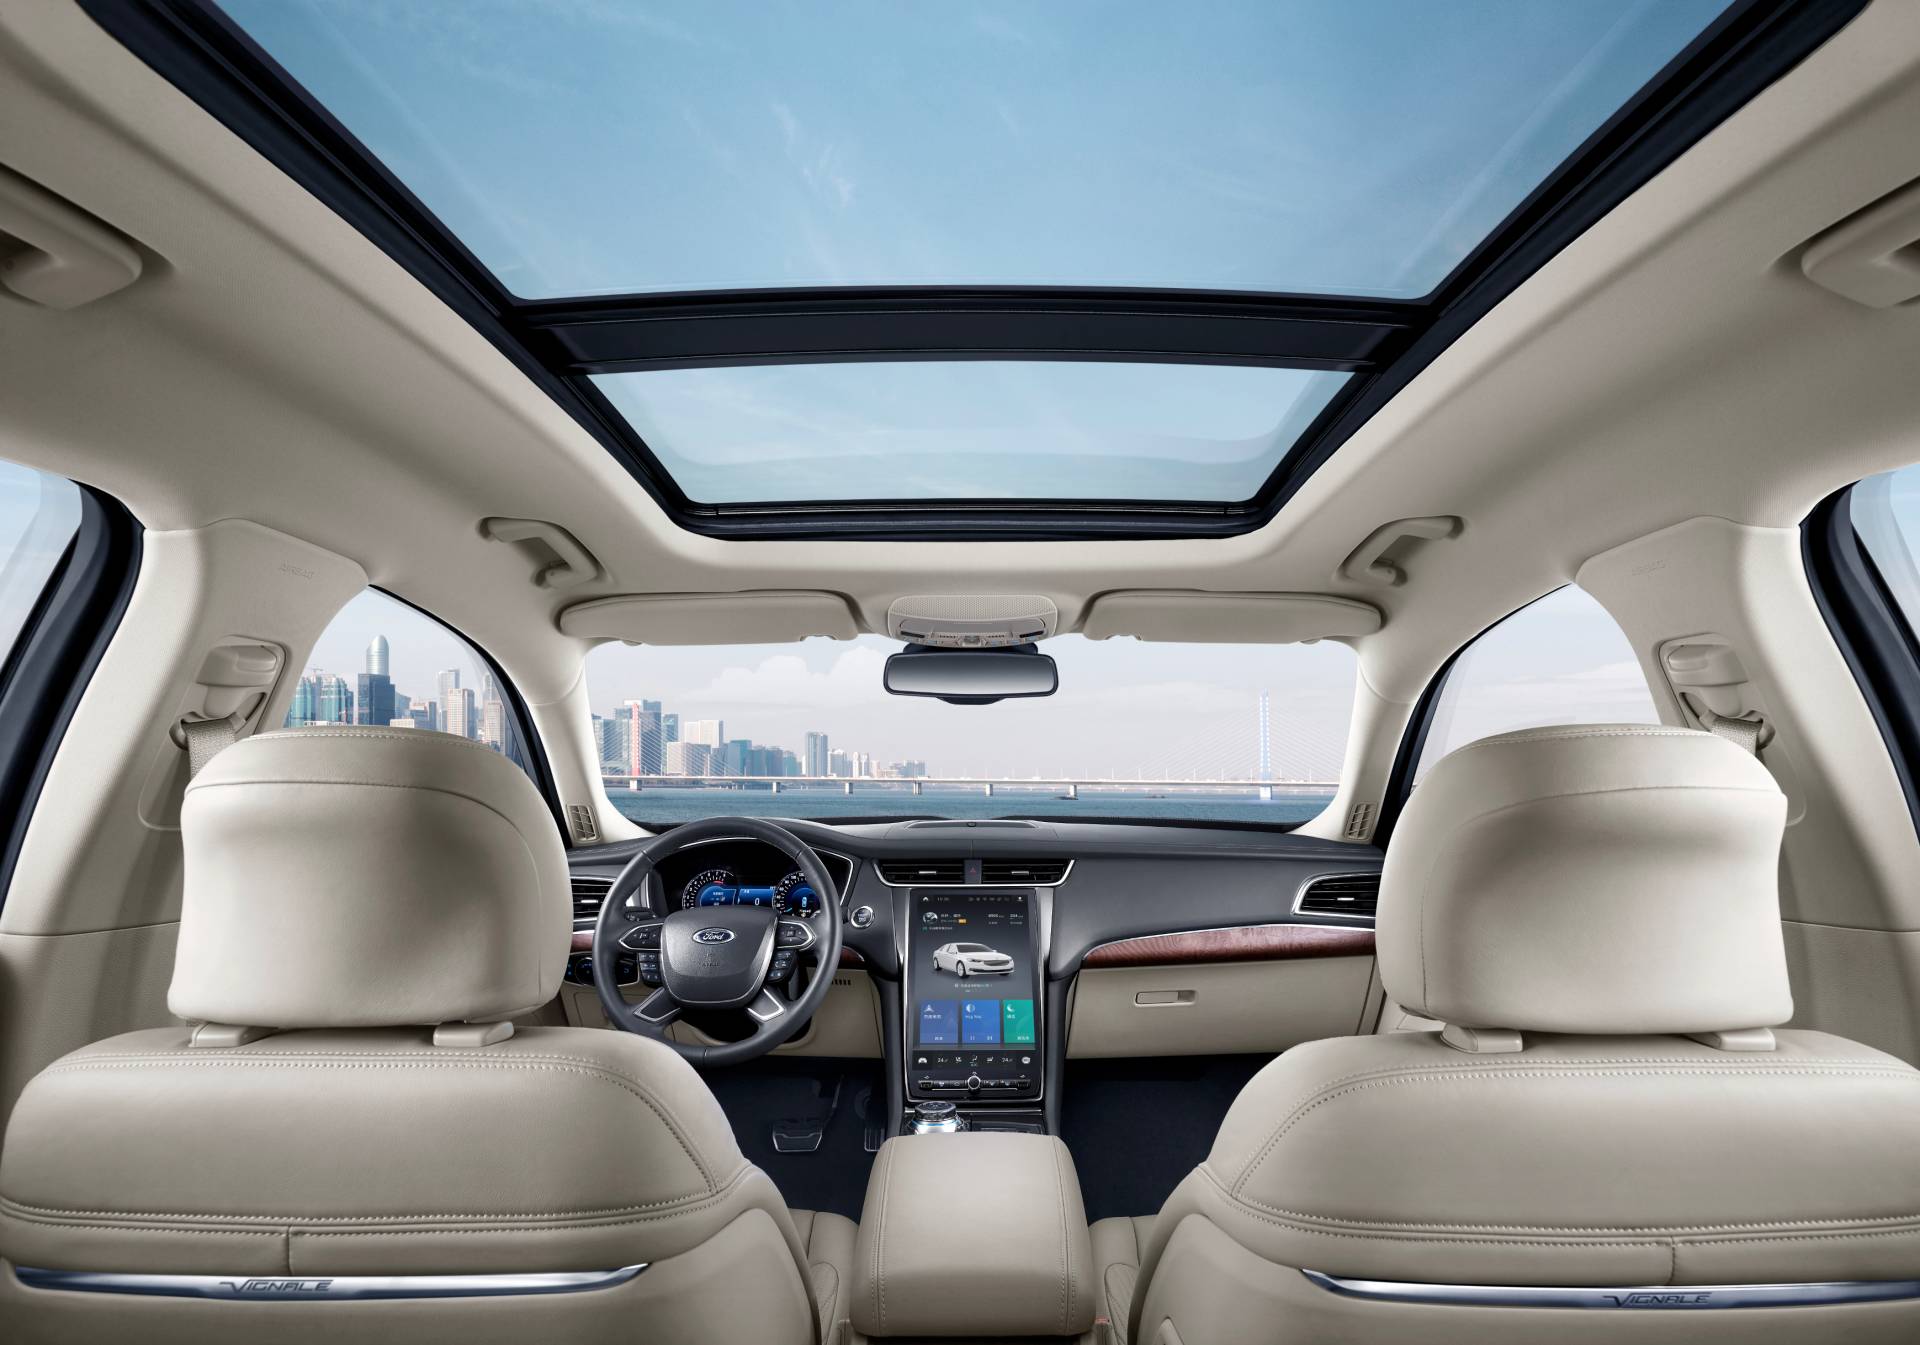 2020 ford taurus vignale boasts 12 8 inch tablet touchscreen in china carscoops 2020 ford taurus vignale boasts 12 8